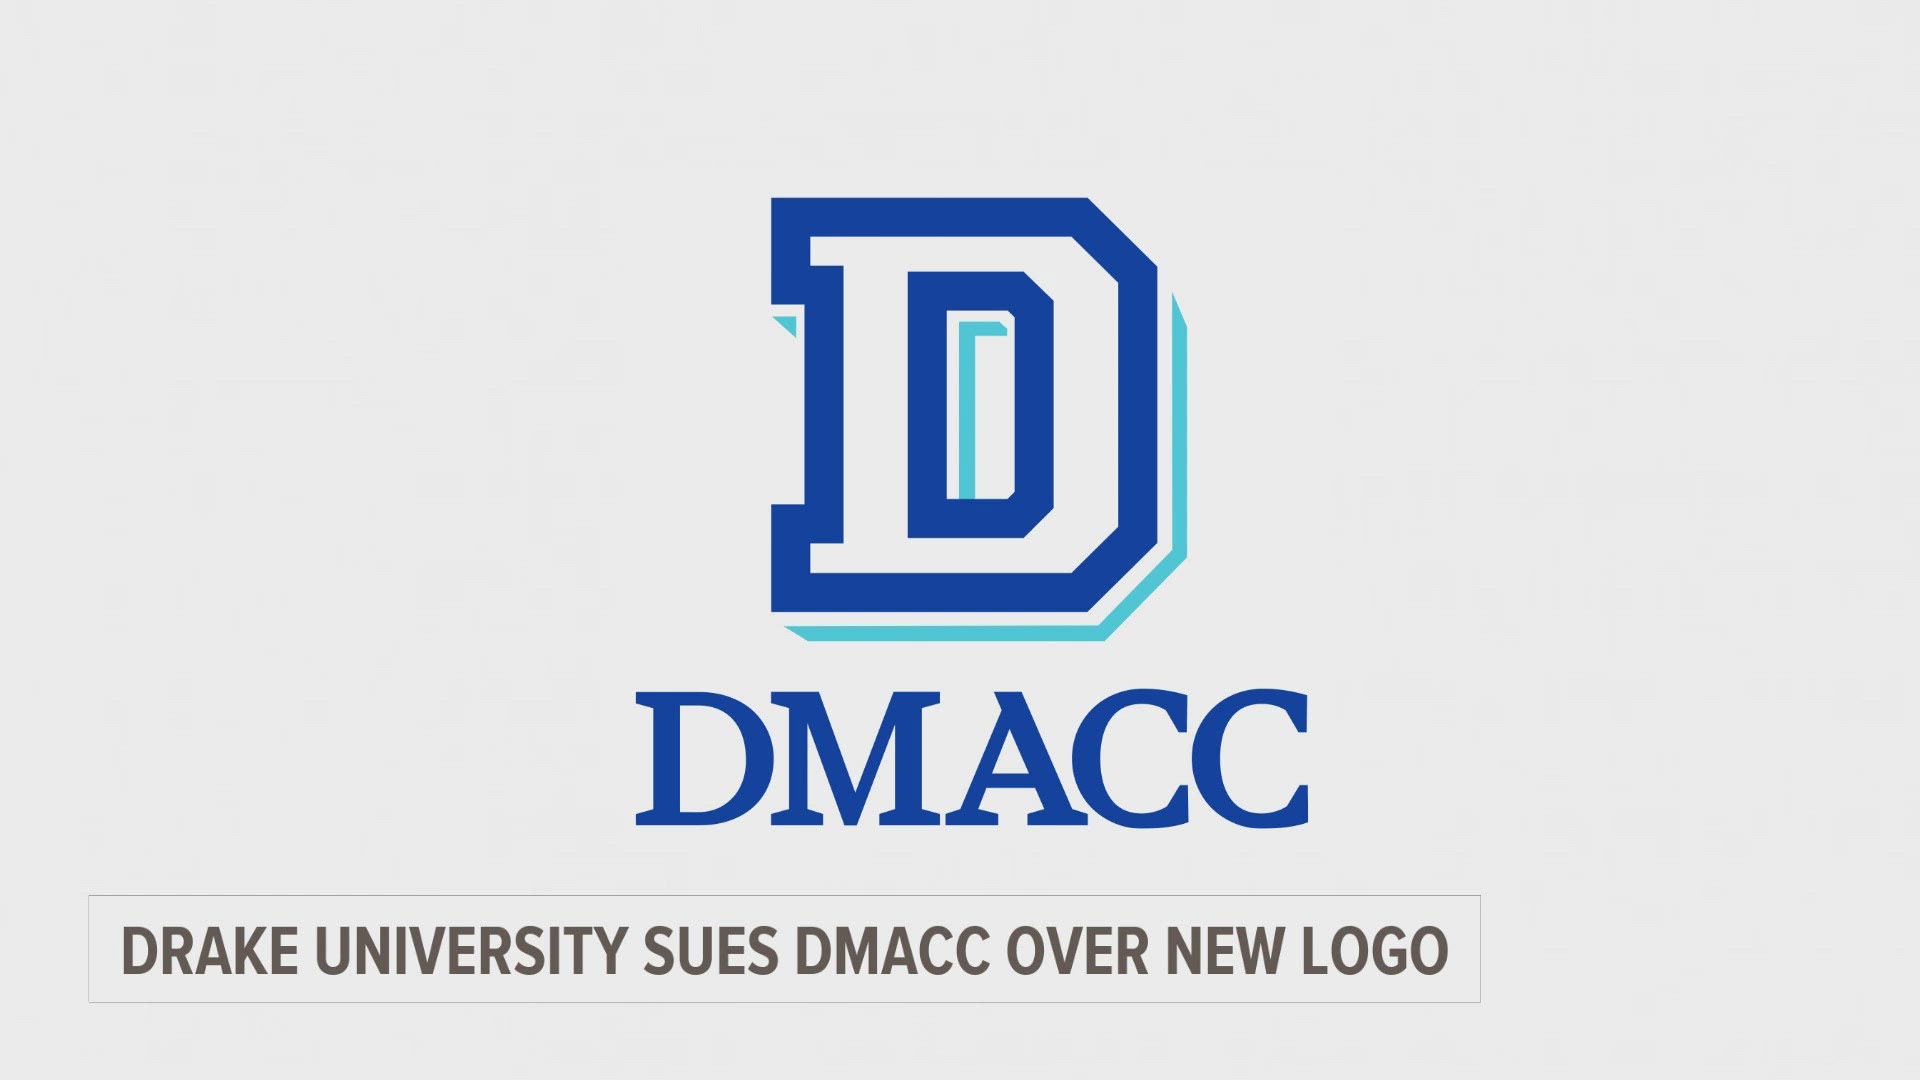 "Our hope is that we can move forward with our joint mission of providing students with a high-quality education," a representative for DMACC said.